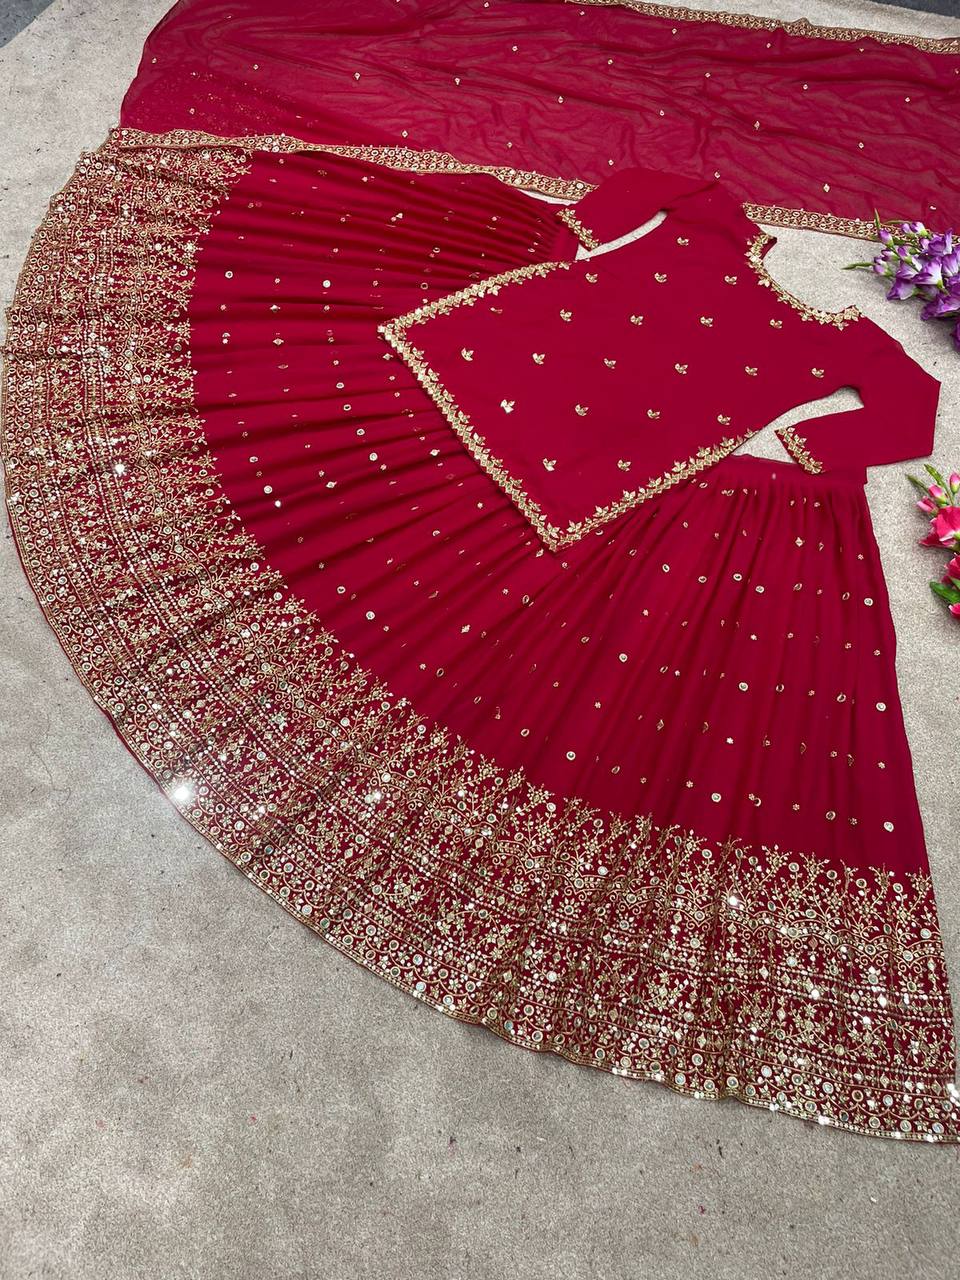 Fashionable Pink Color Sequence Work Top With Lehenga